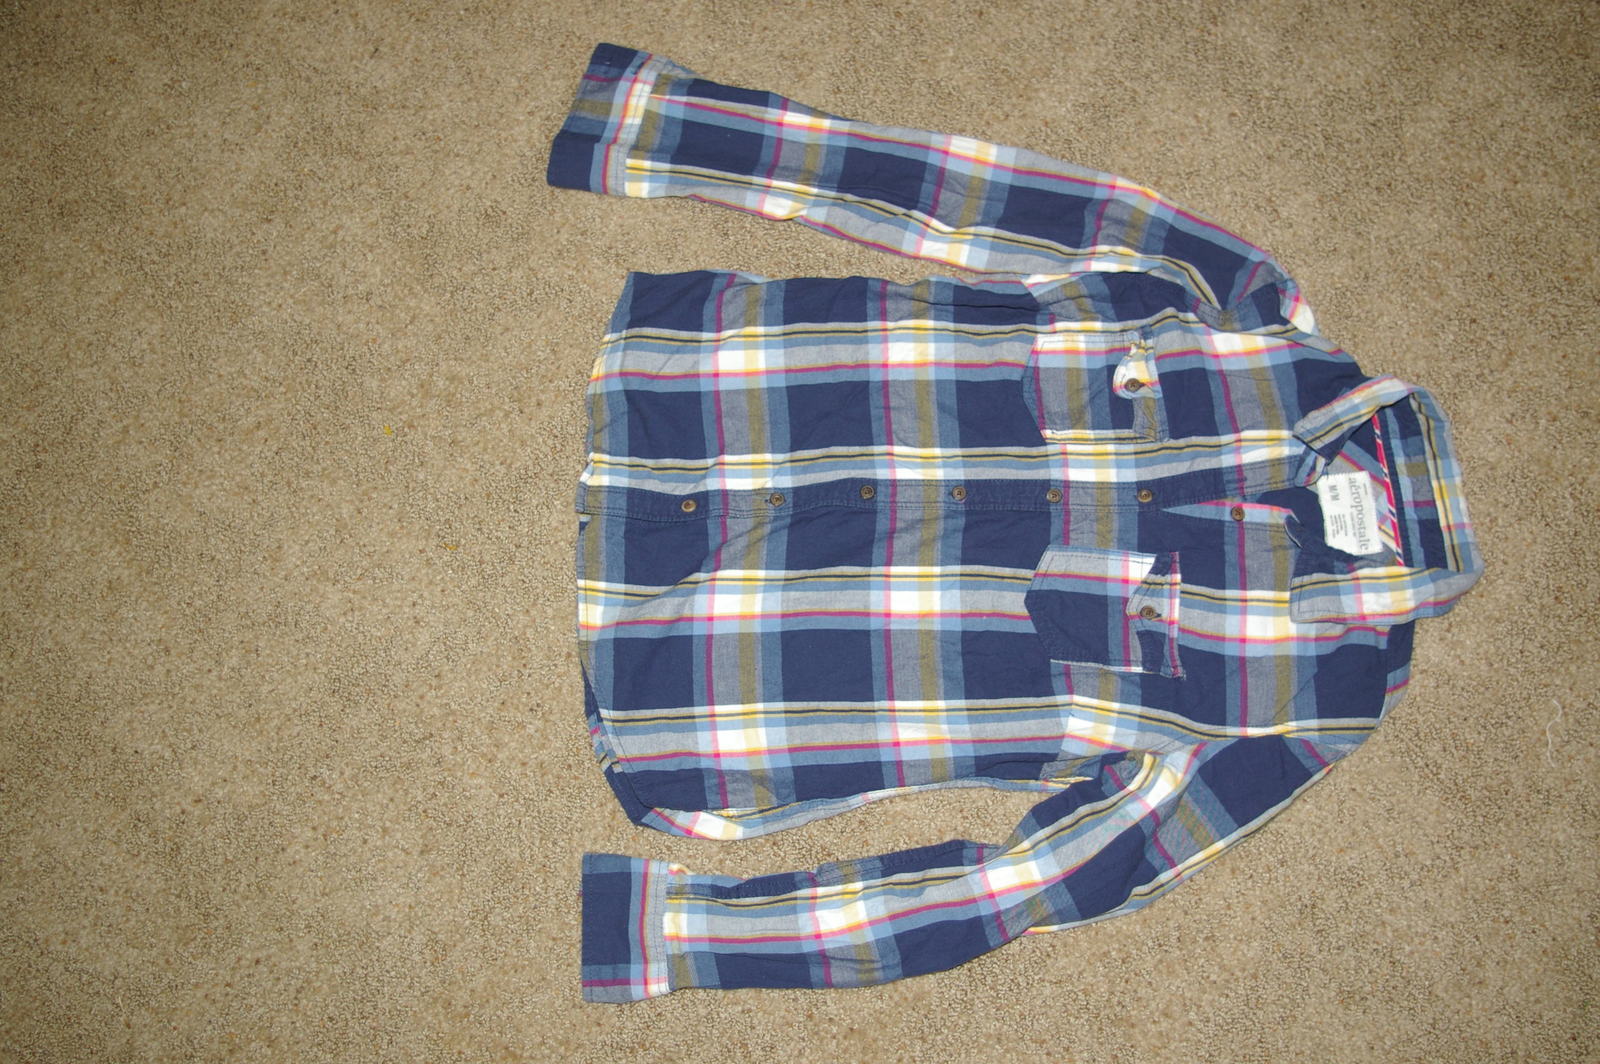 Primary image for Aeropostale Multi Colored Plaid Button Down Shirt Size M Blue Pink Yellow White